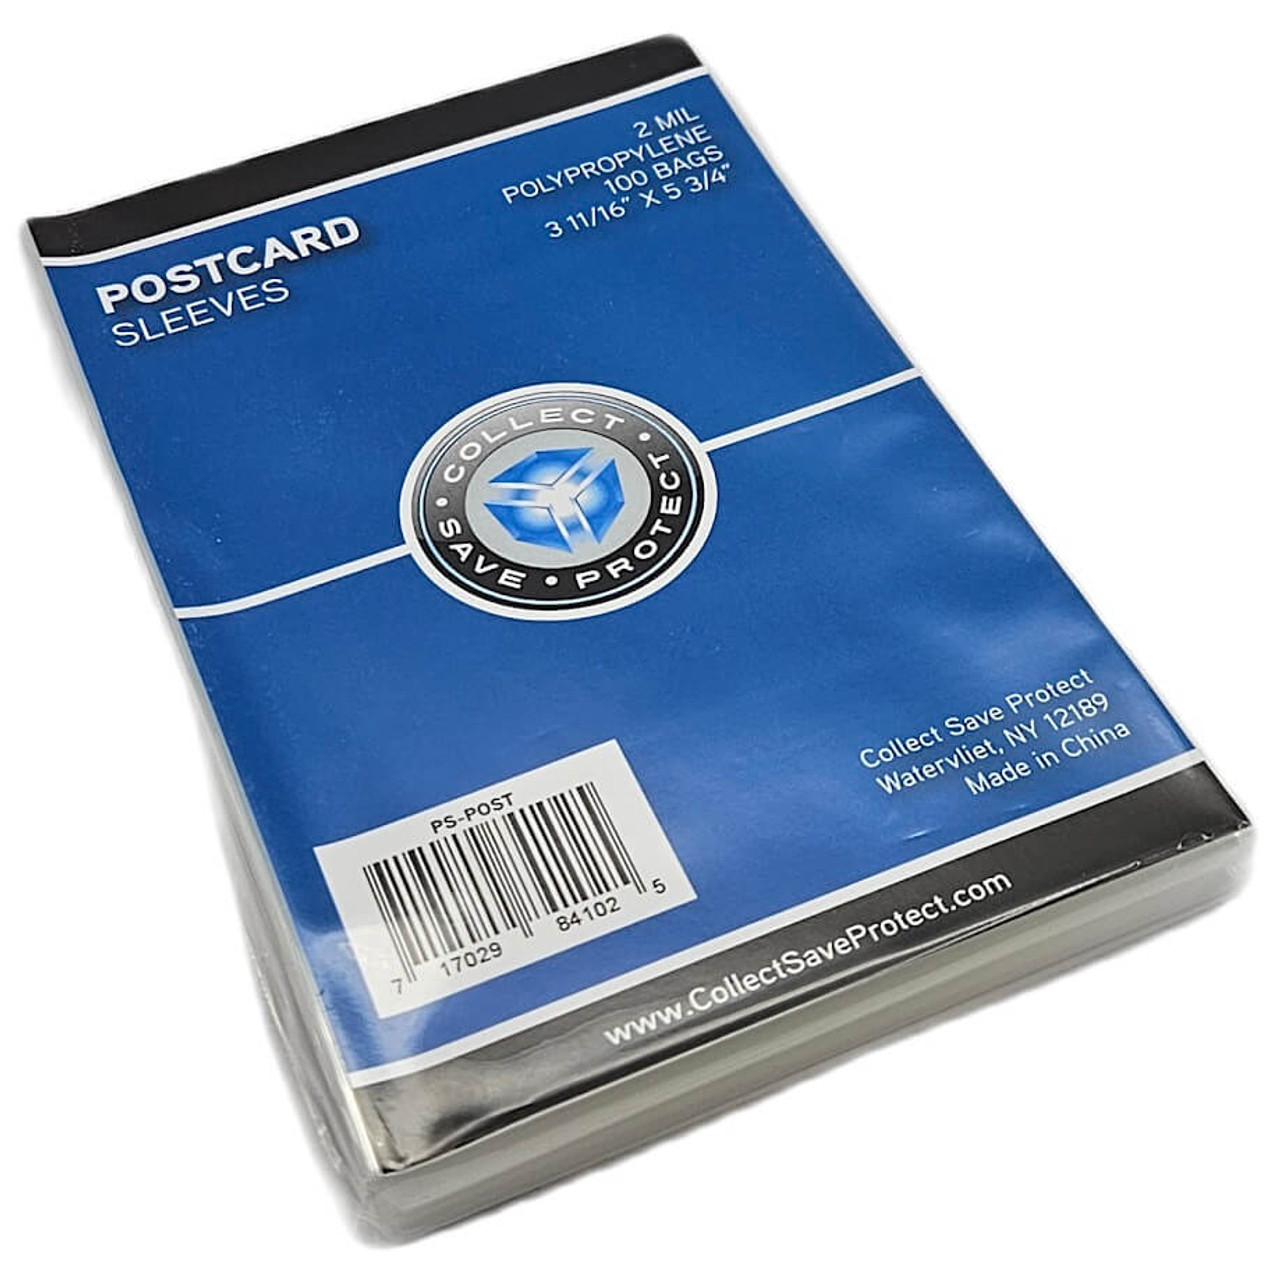 BCW	 Photo Soft Sleeves, 5 x 7 - 100 count